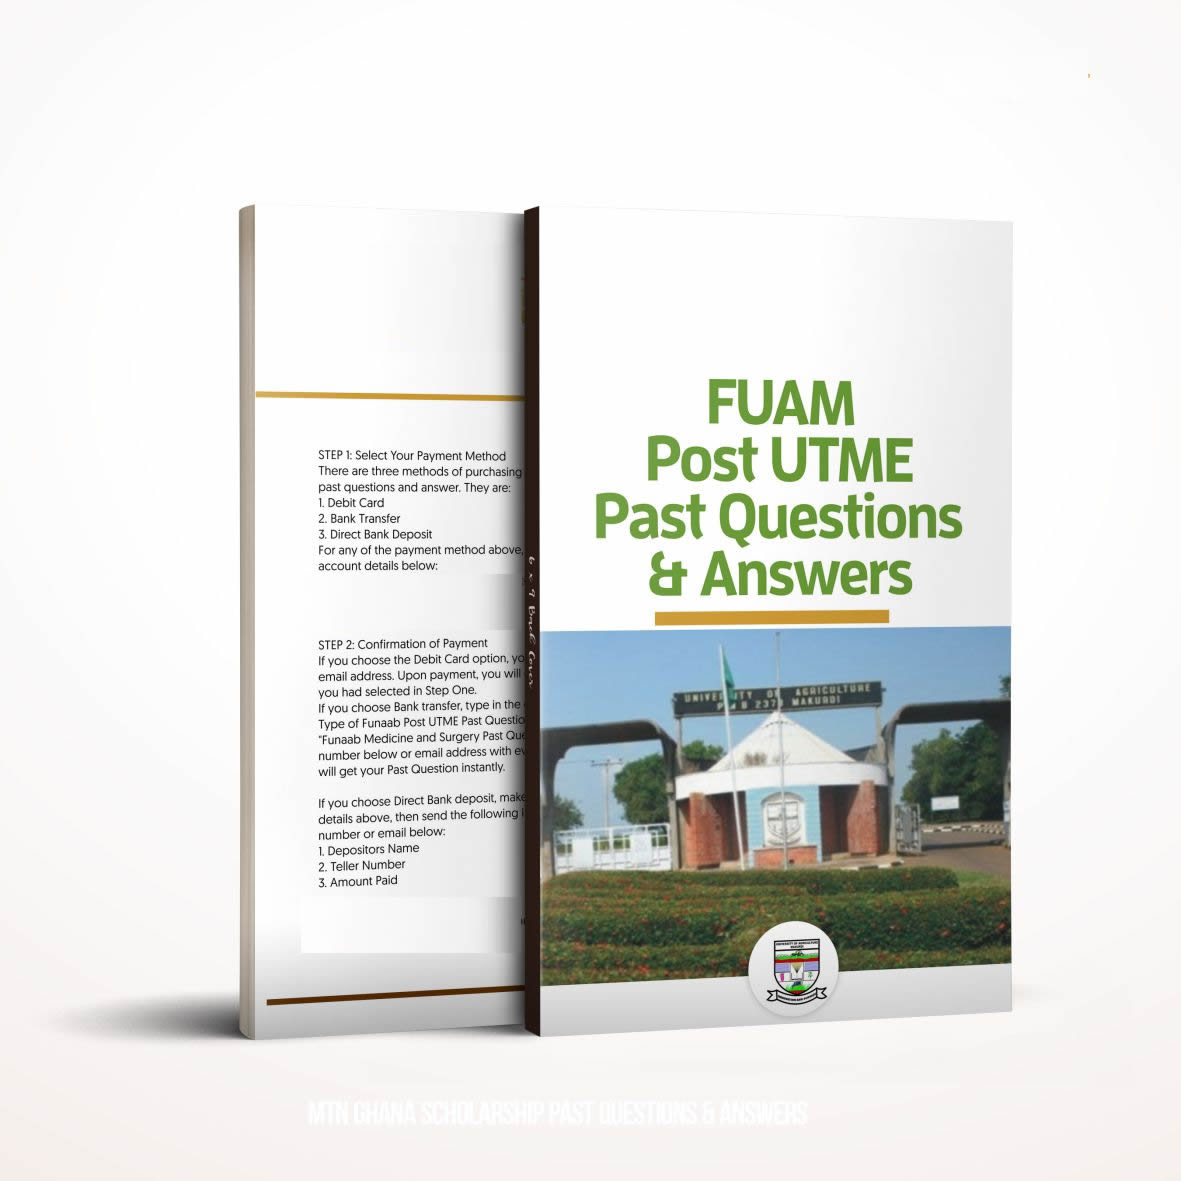 FUAM Post UTME past questions and answers